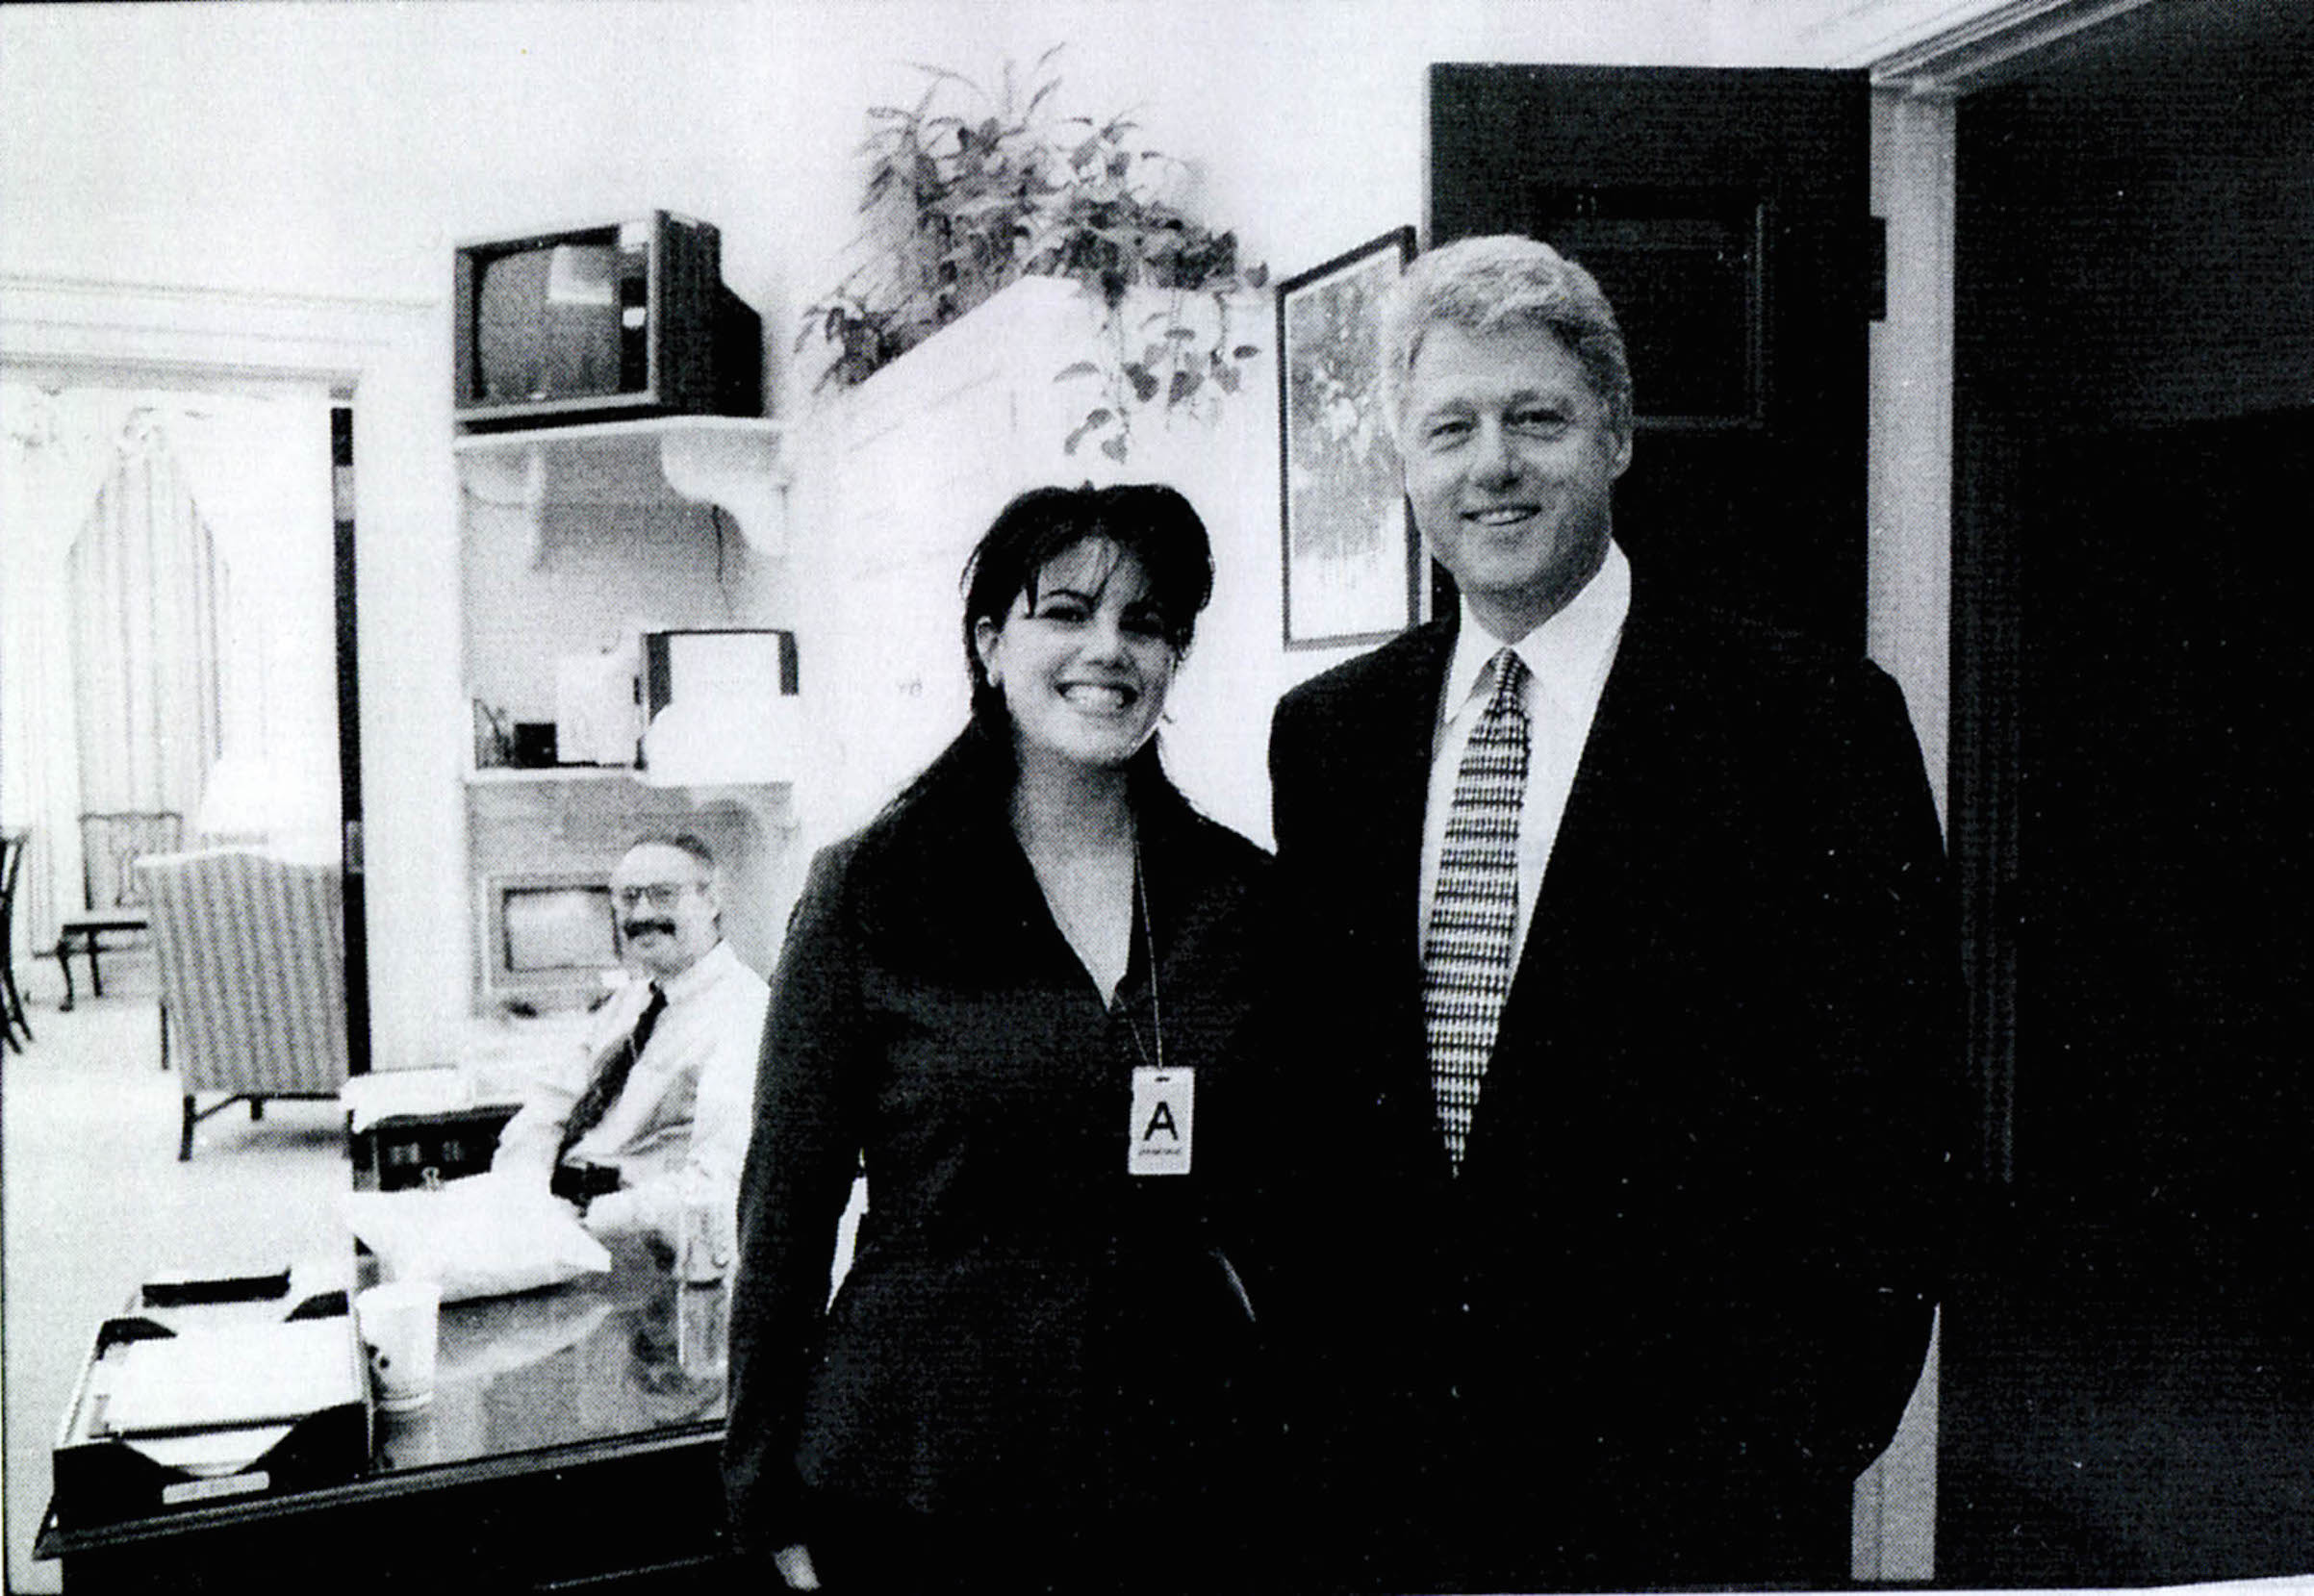 A photograph showing former White House intern Monica Lewinsky meeting President Bill Clinton at a White House function, submitted as evidence in documents by the Starr investigation and released by the House Judiciary committee Sept. 21, 1998. (Getty Images)